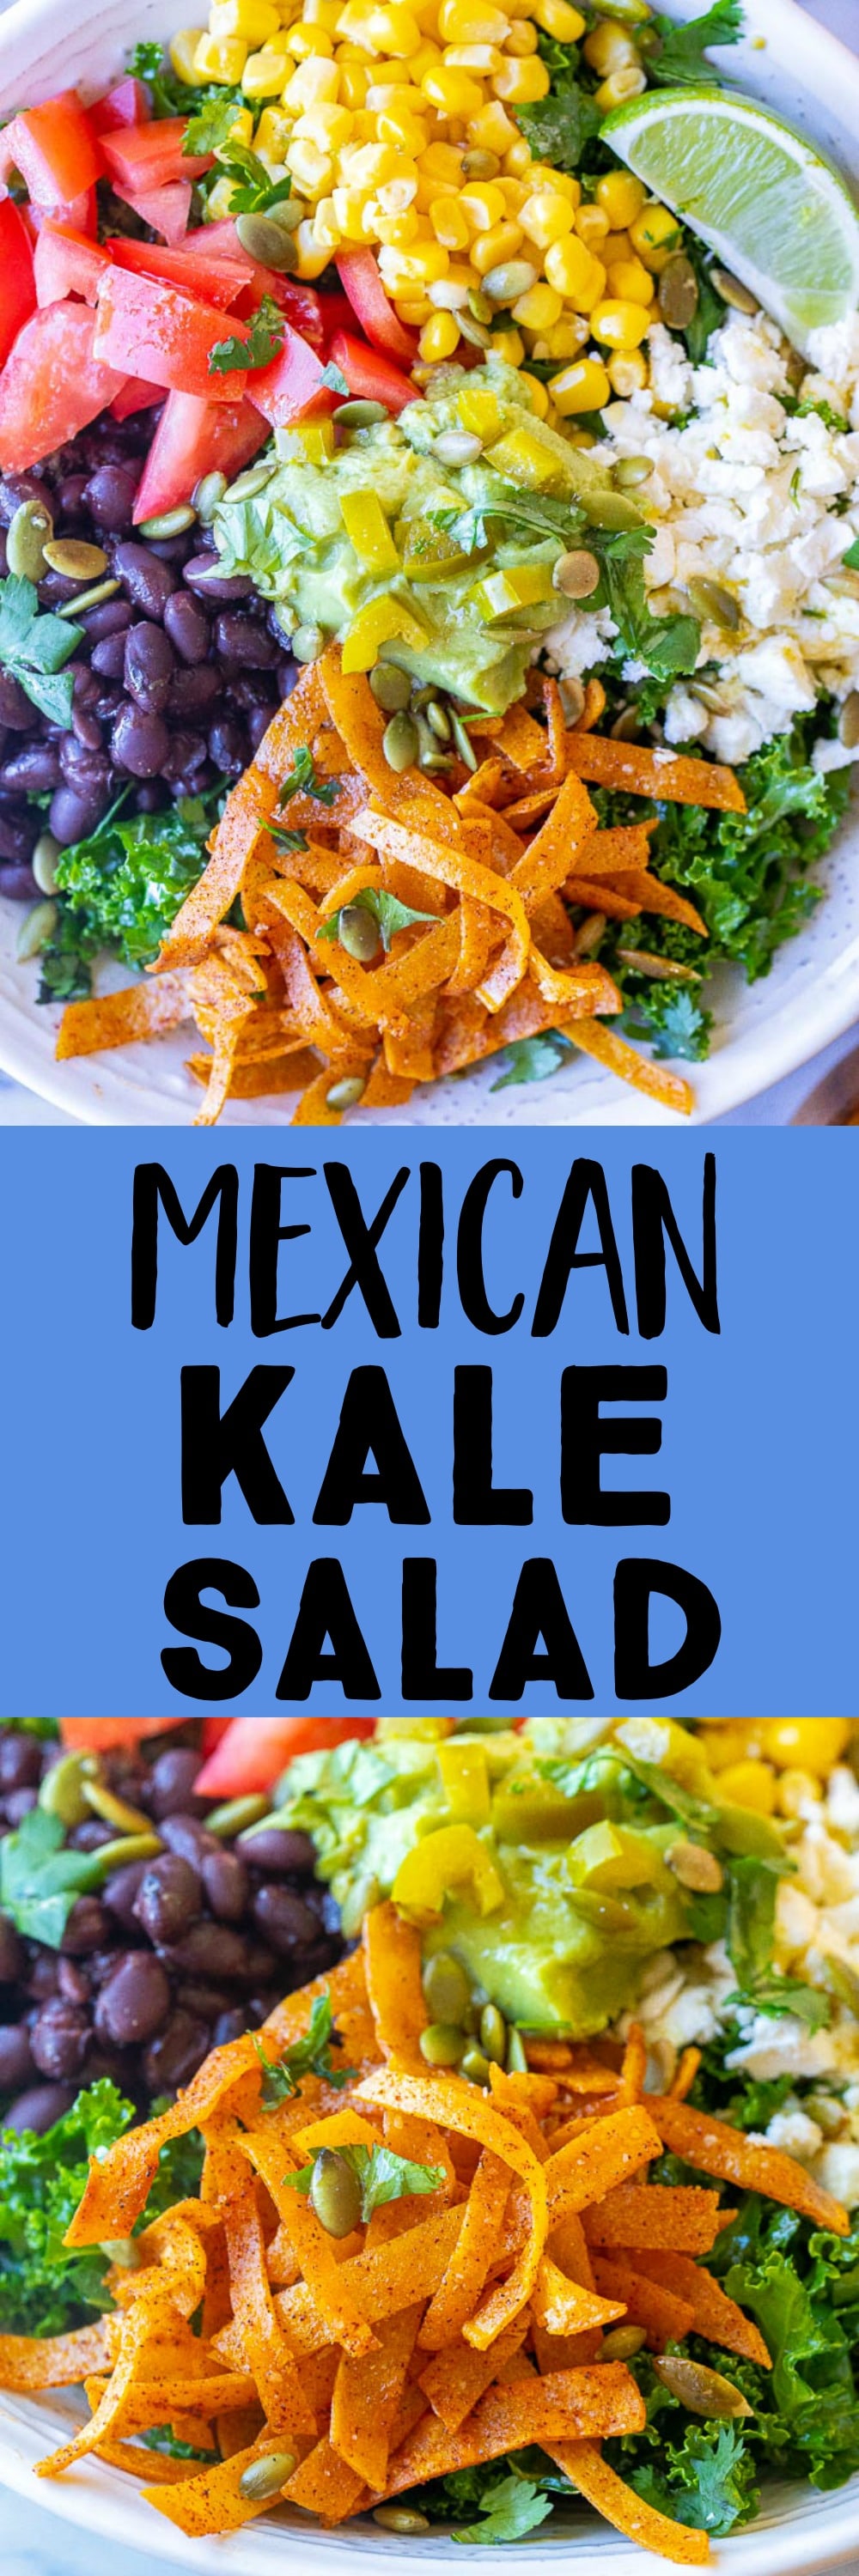 Mexican Kale Salad with Cumin Lime Dressing - She Likes Food